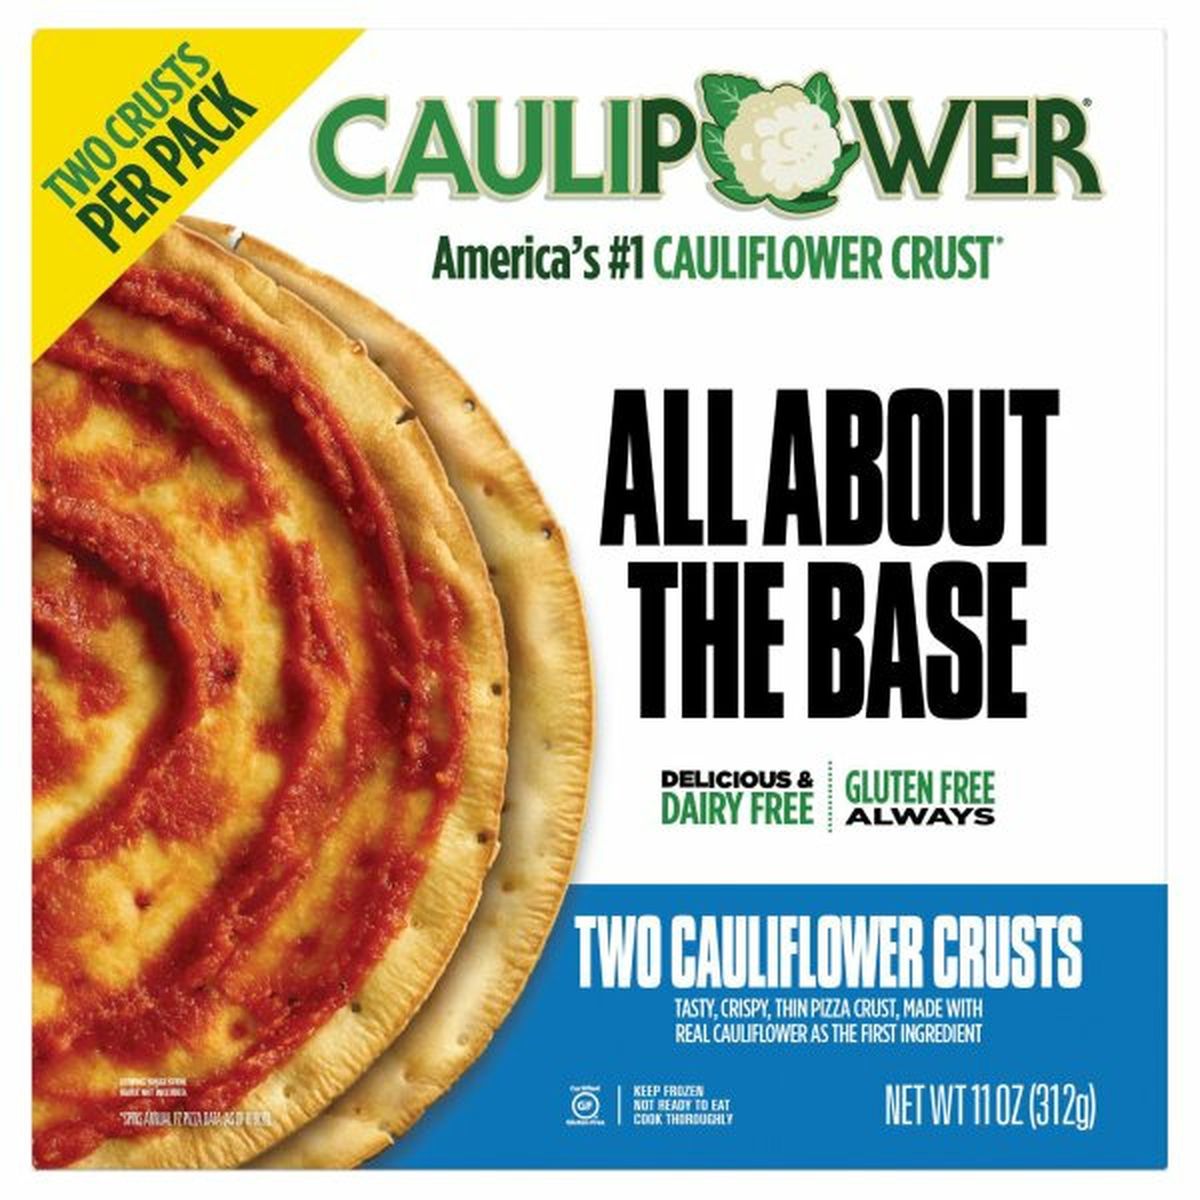 Calories in Caulipower Cauliflower Crusts, All About the Base